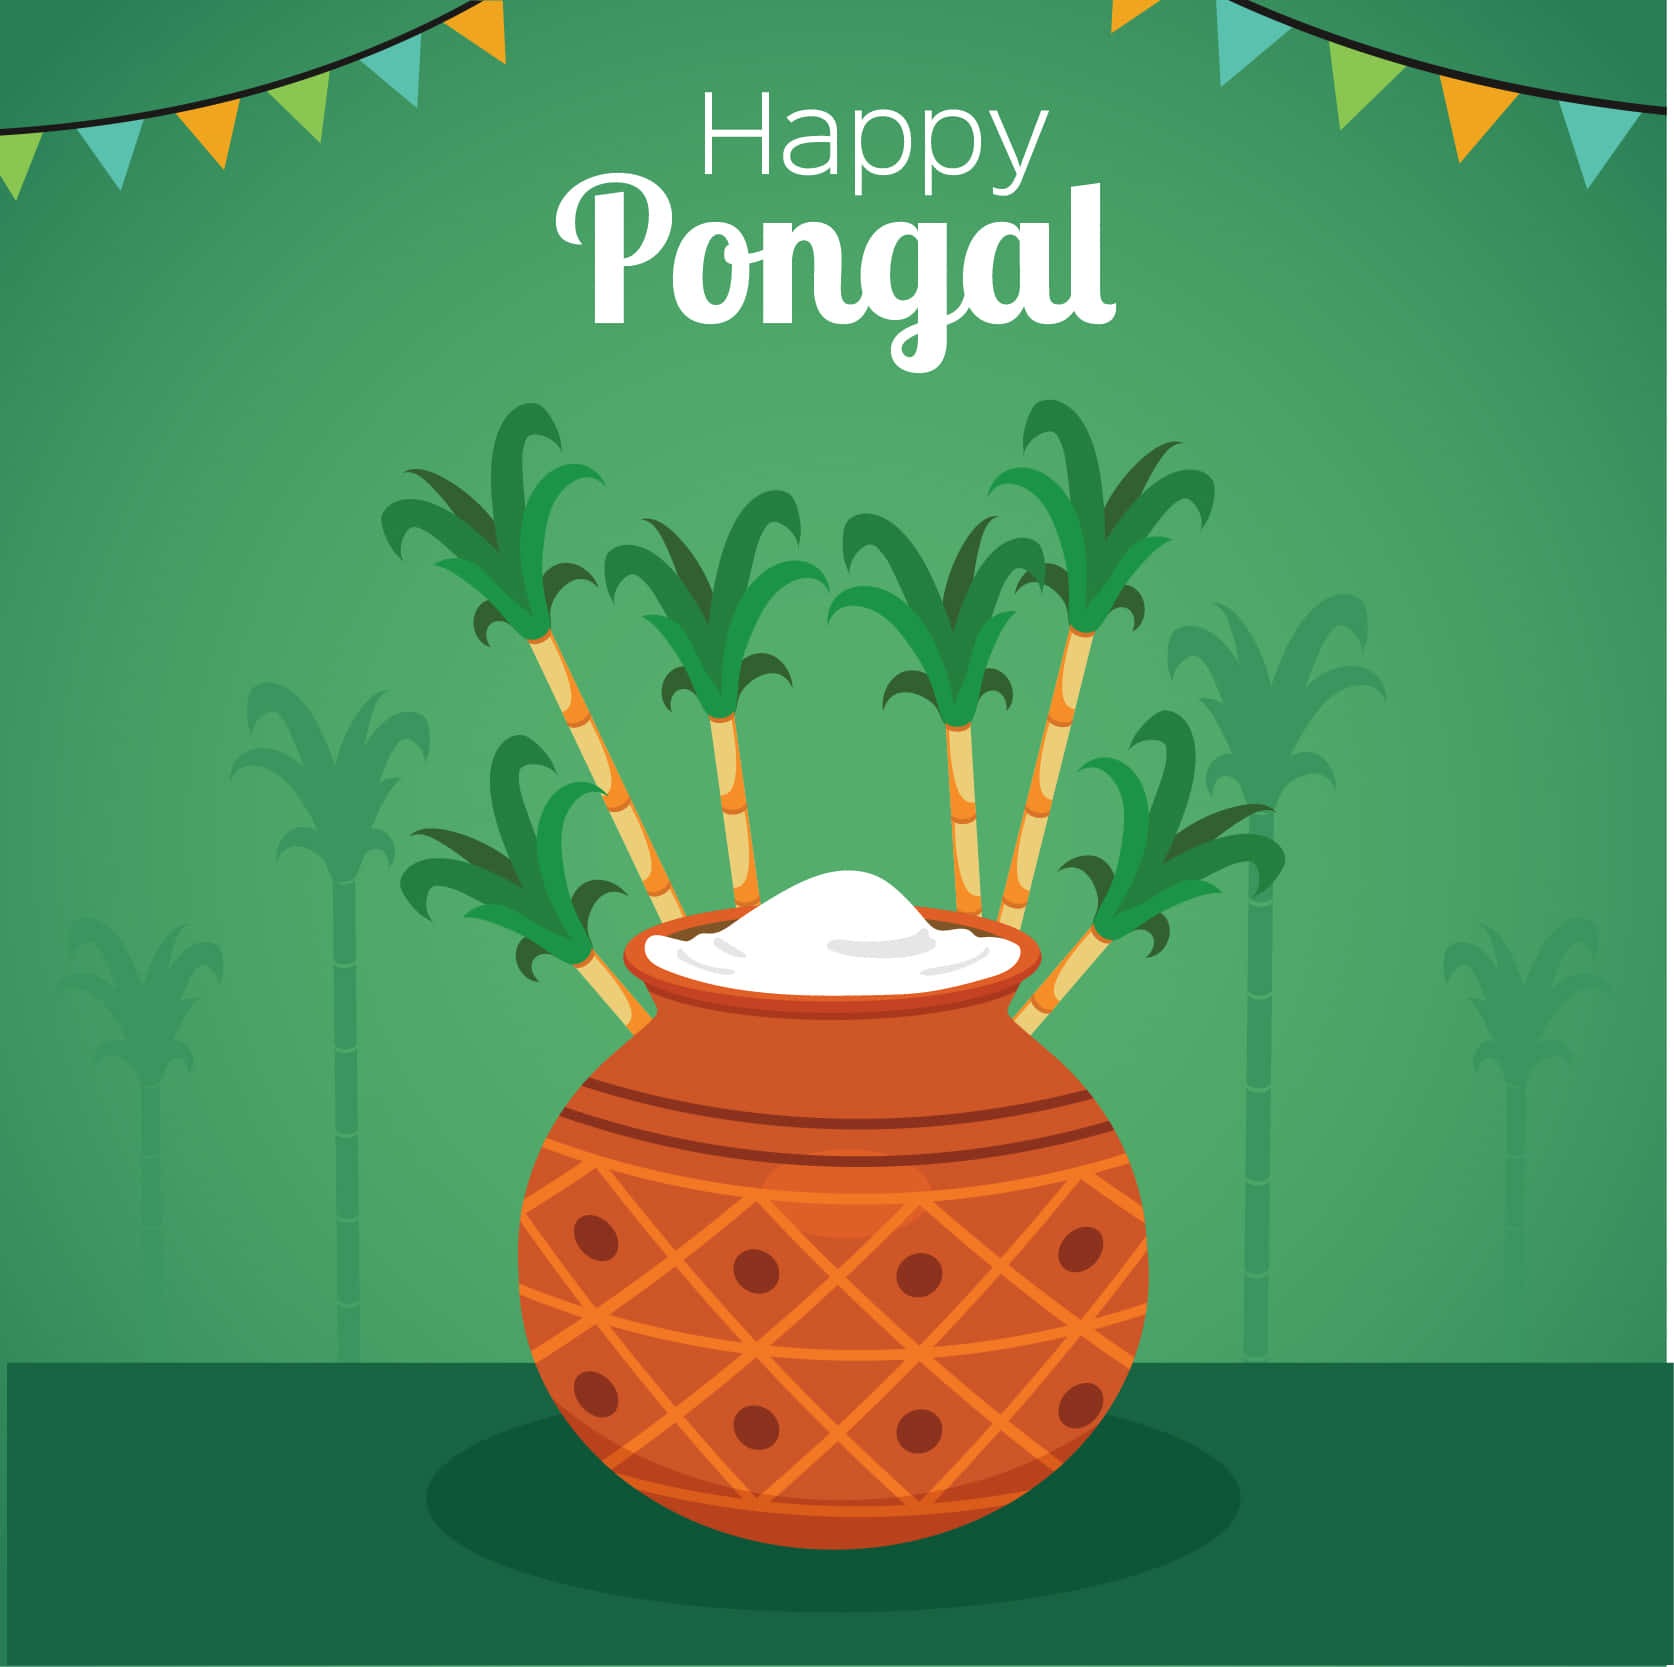 Happy Pongal 2022 Pic Download